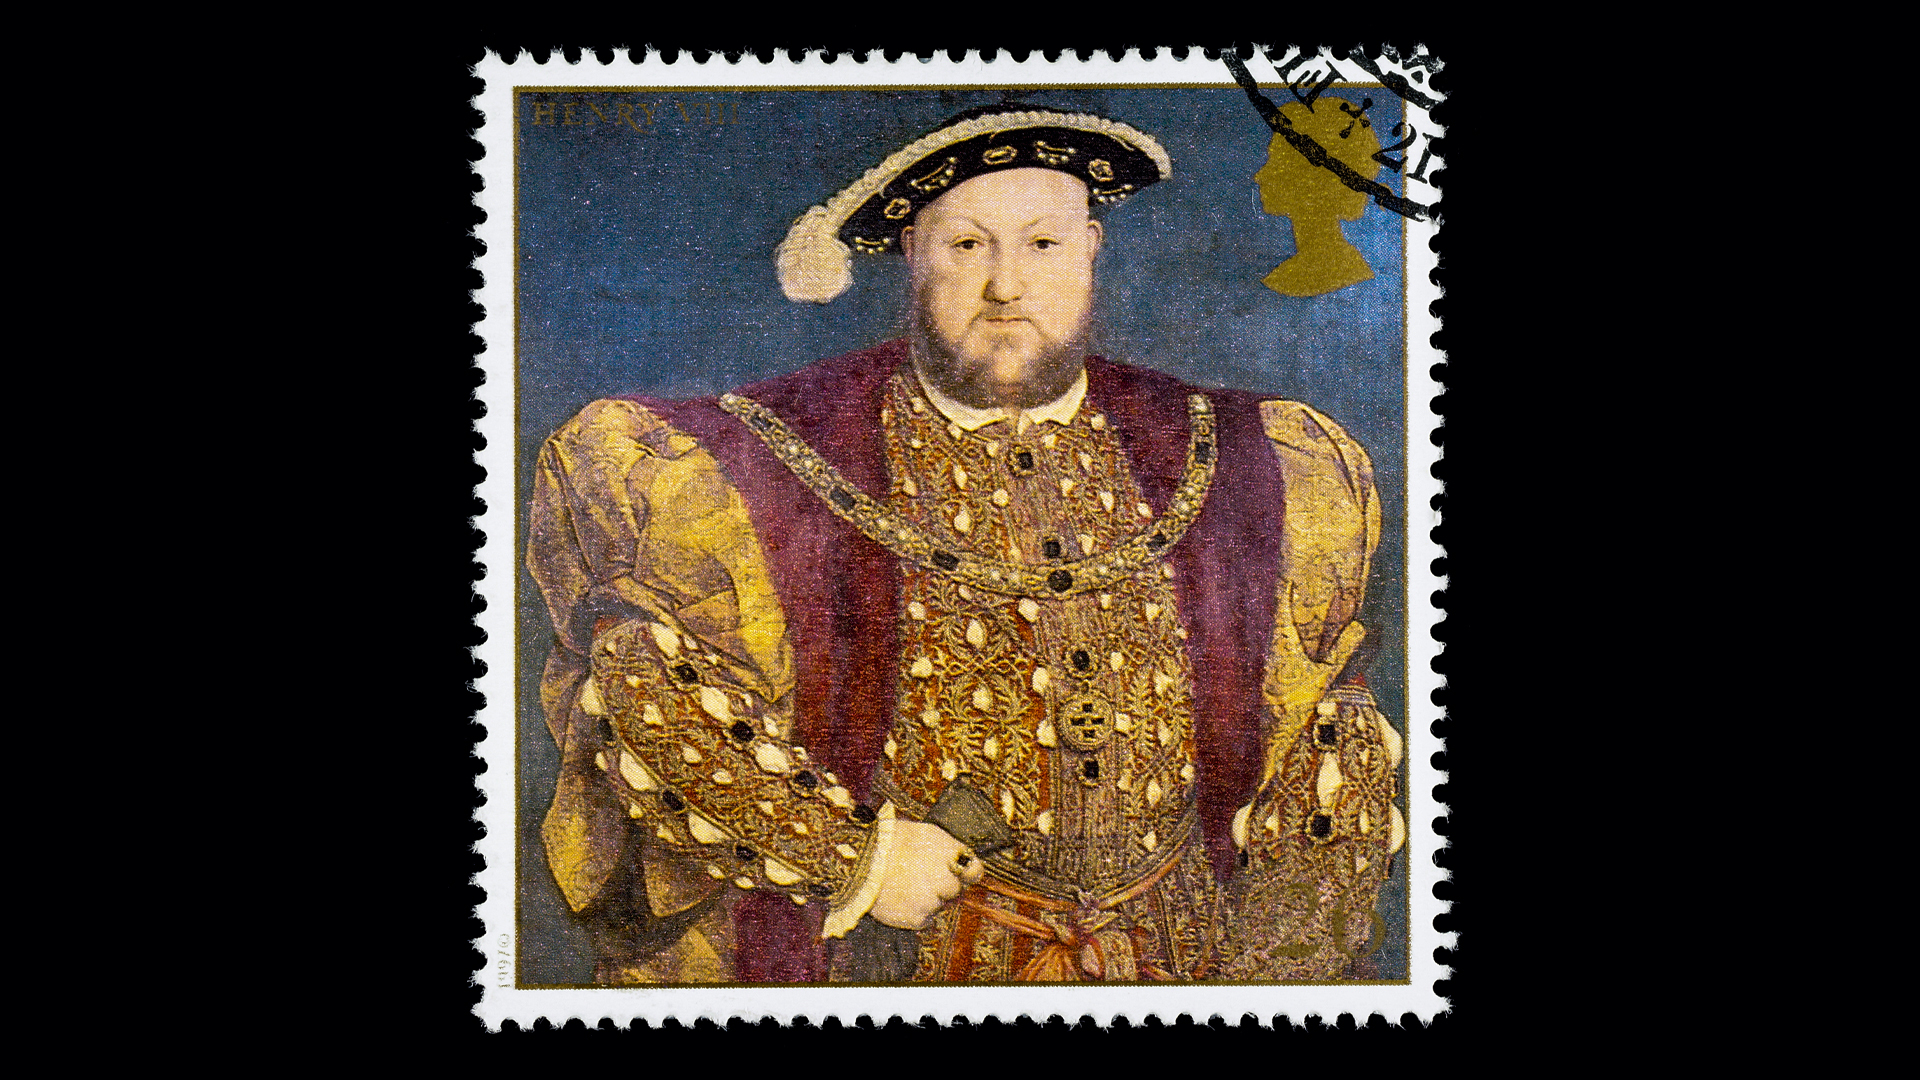 A stamp featuring Henry VIII